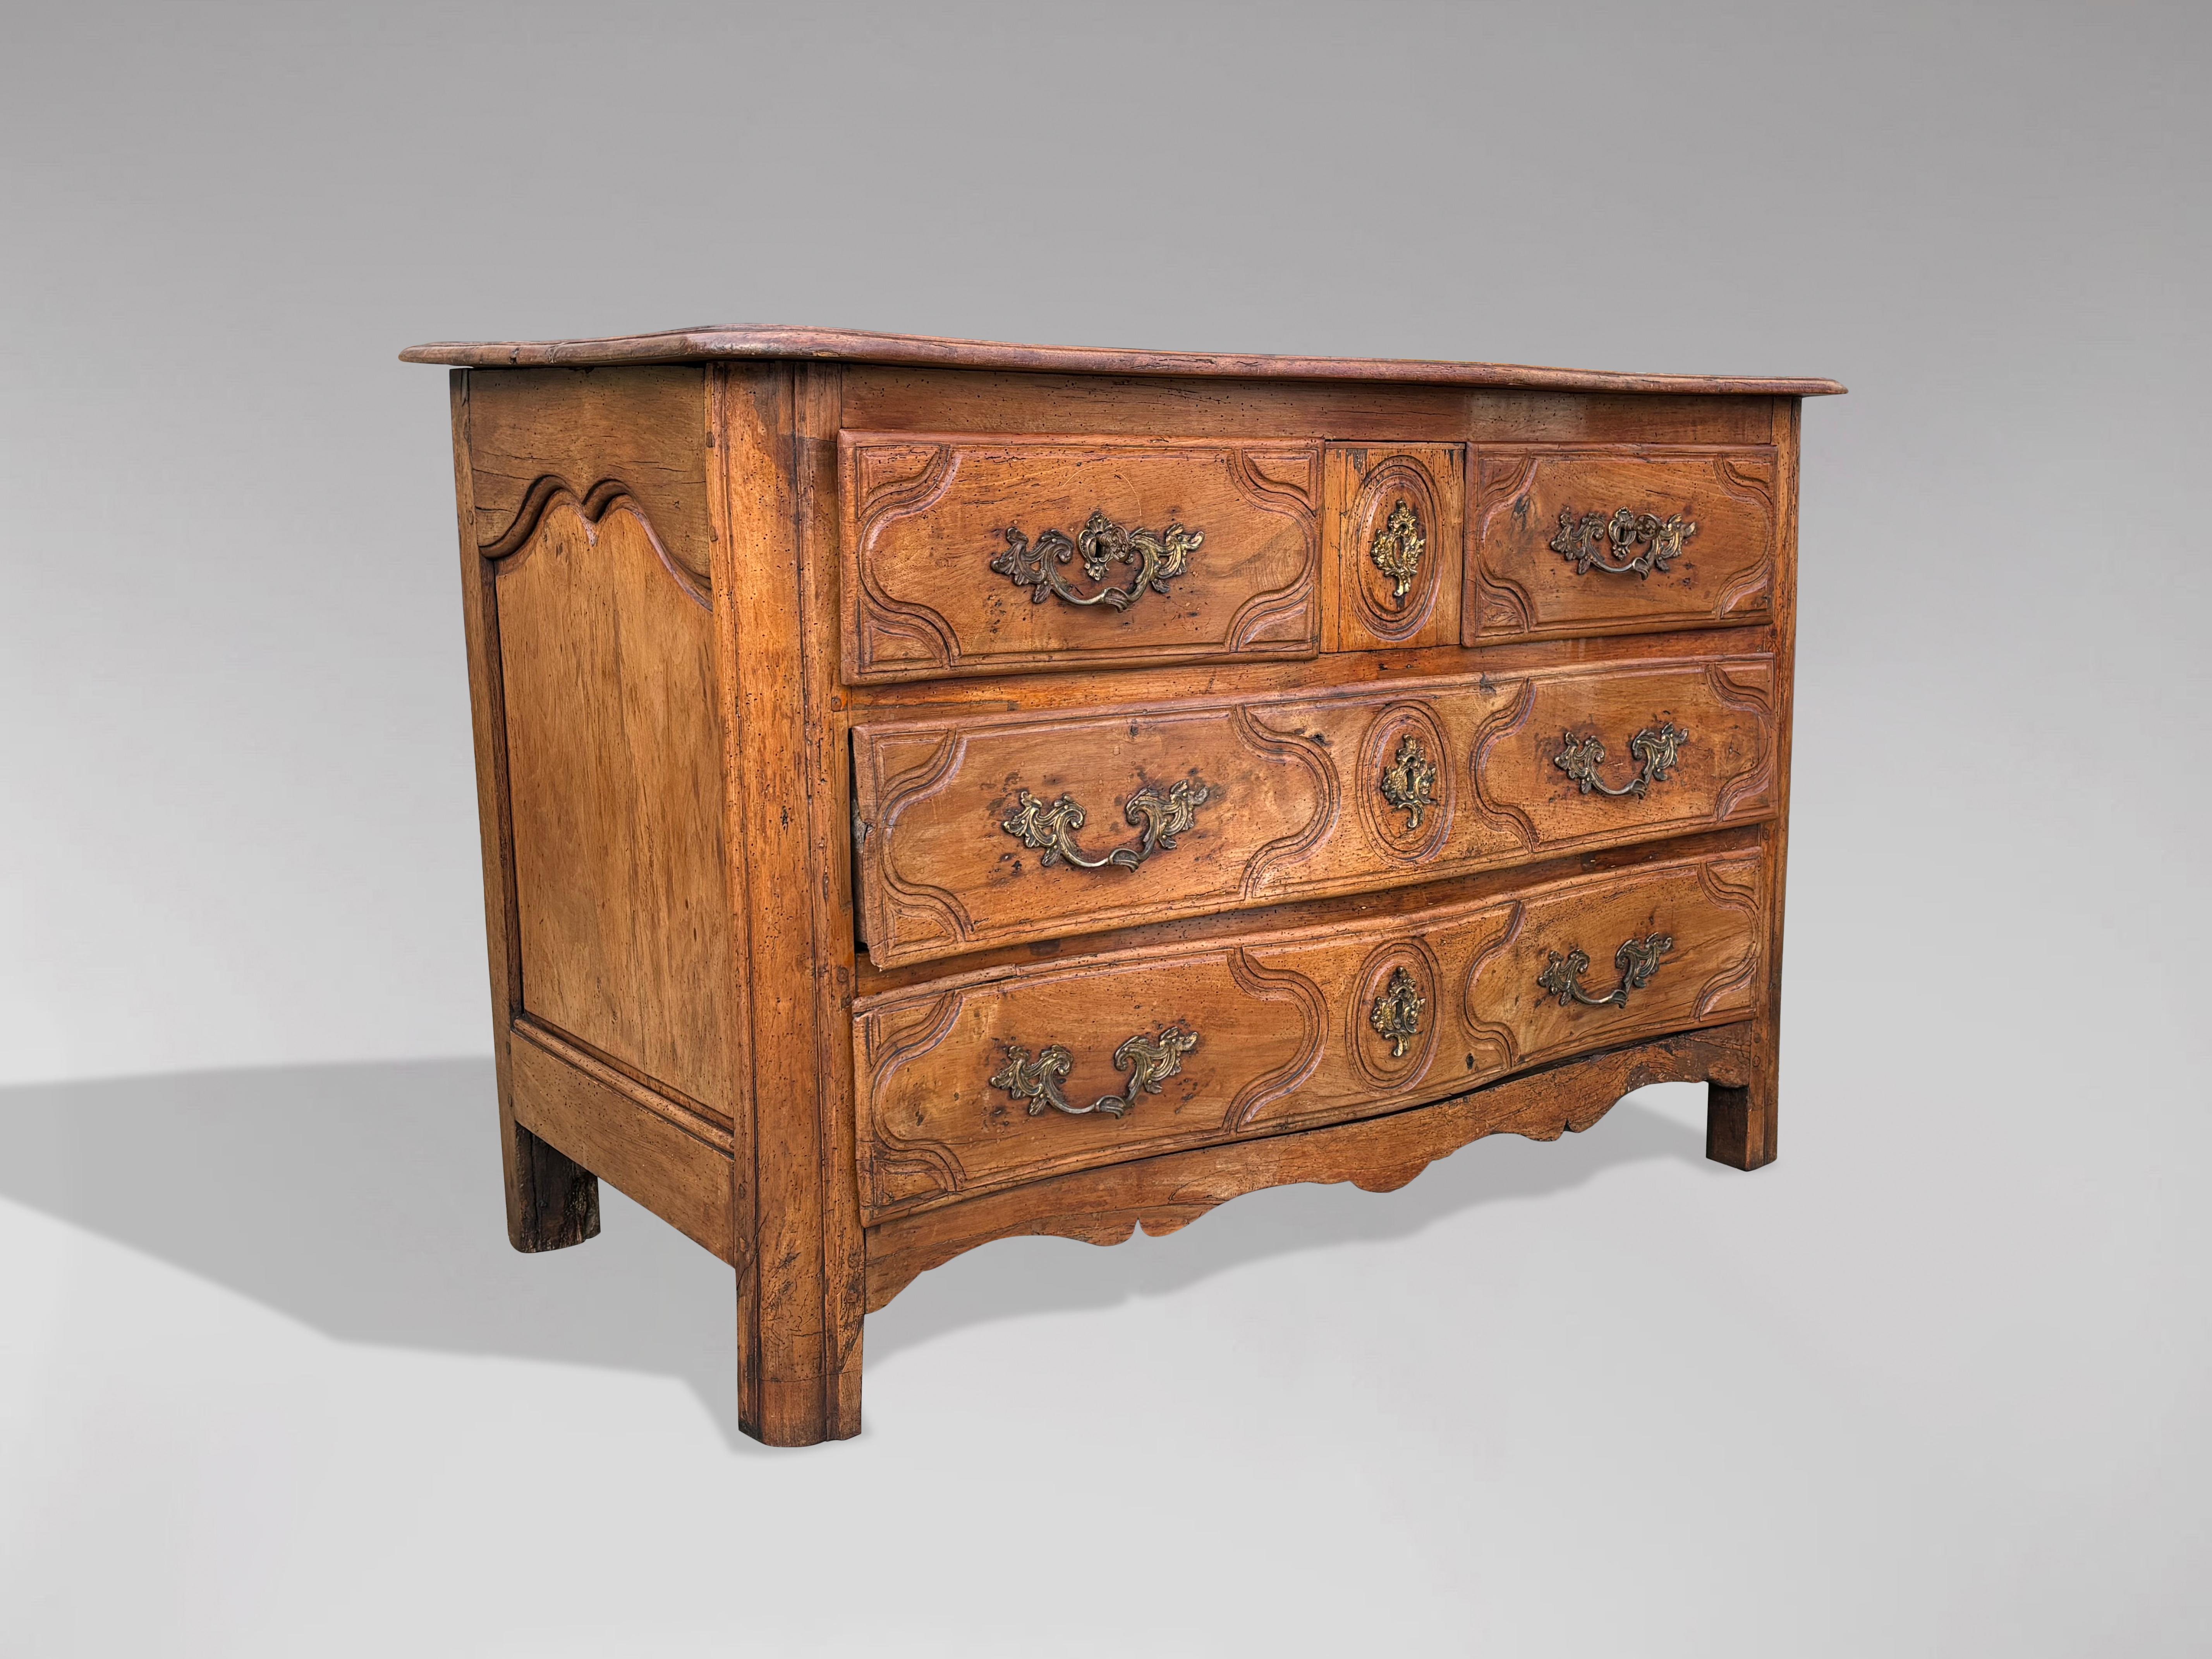 A mid 18th century walnut French provincial commode of the Louis XV period. This chest of drawers features three levels with a secret drawer situated between the top two drawers, reached by opening the drawers on either side first. The rectangular